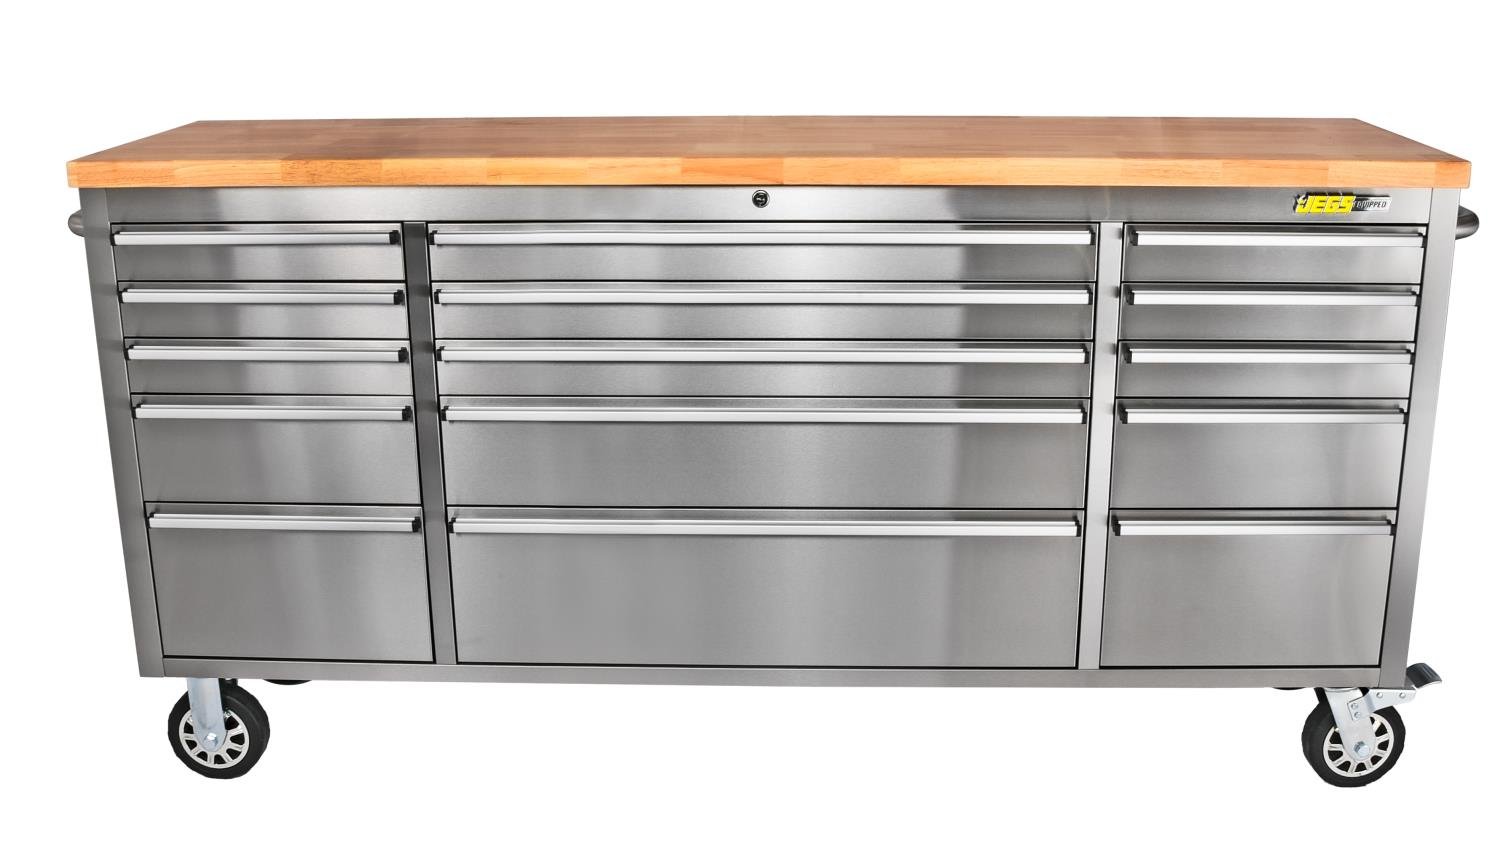 JEGS 555-81448: 72 in. Rolling Tool Cabinet | Stainless Steel | Includes:  (15) Lockable Drawers w/ Ball Bearing Soft-Close Slides, Composite Wood  Top, (4) 110v Outlets, (2) USB Ports, (4) 6 in. Casters (2) Locking, (2)  Pull Handles - JEGS